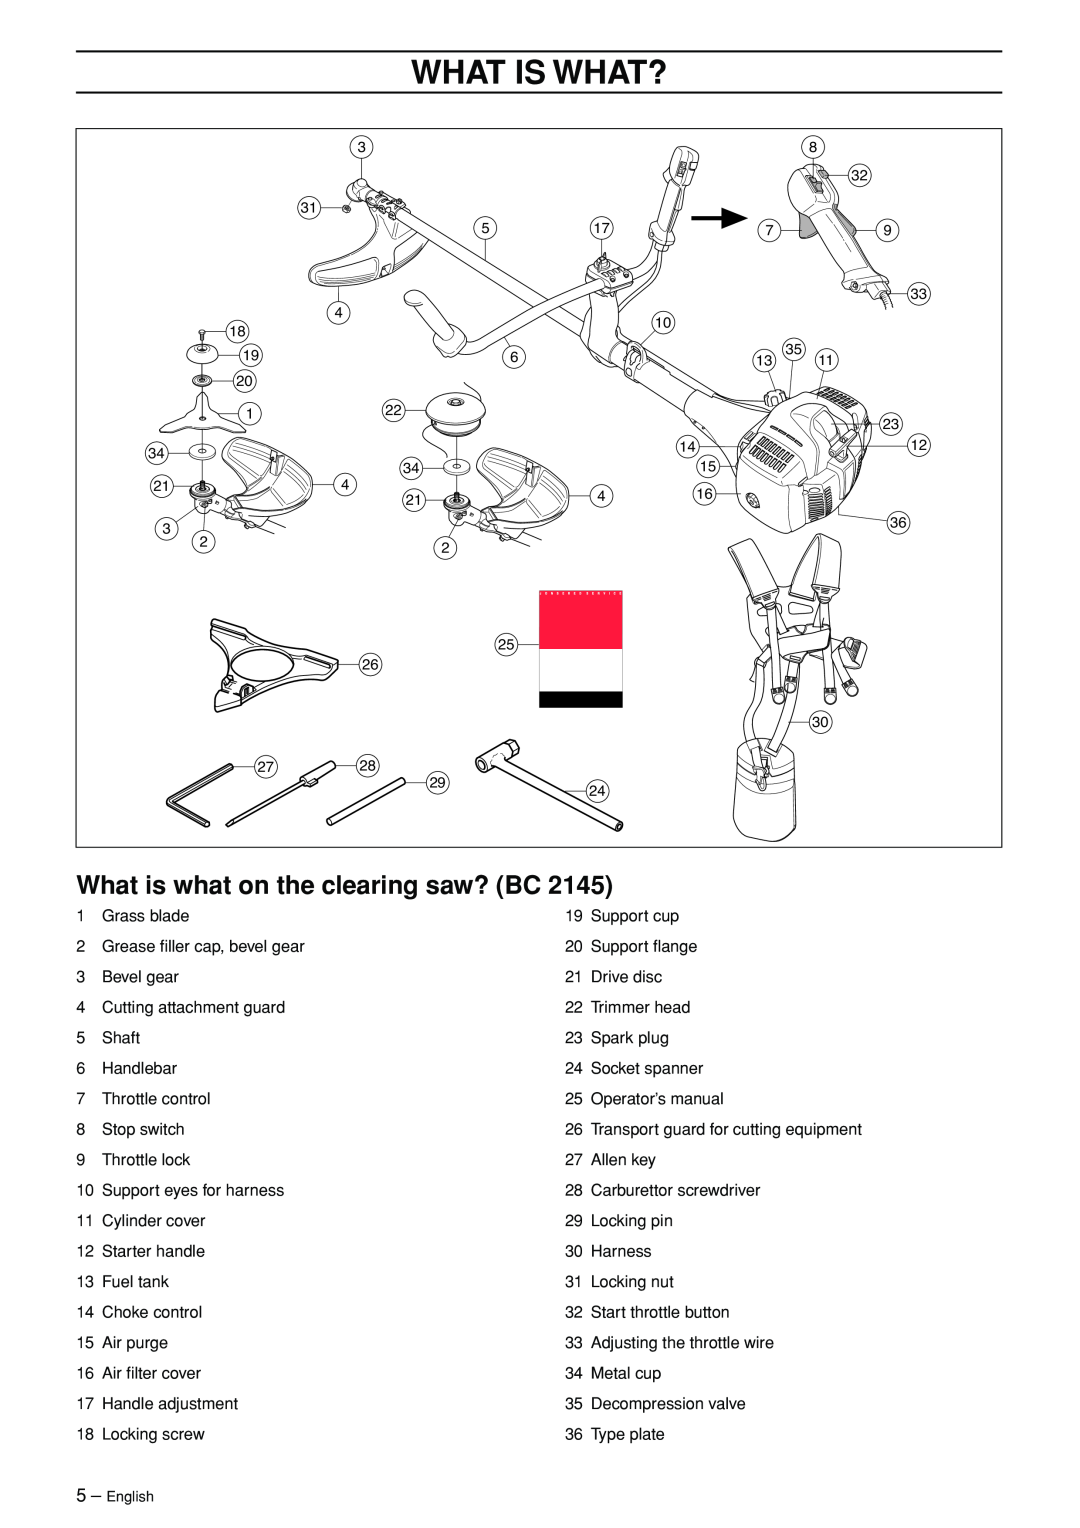 Jonsered FC 2145S manual What Is What?, What is what on the clearing saw? BC 